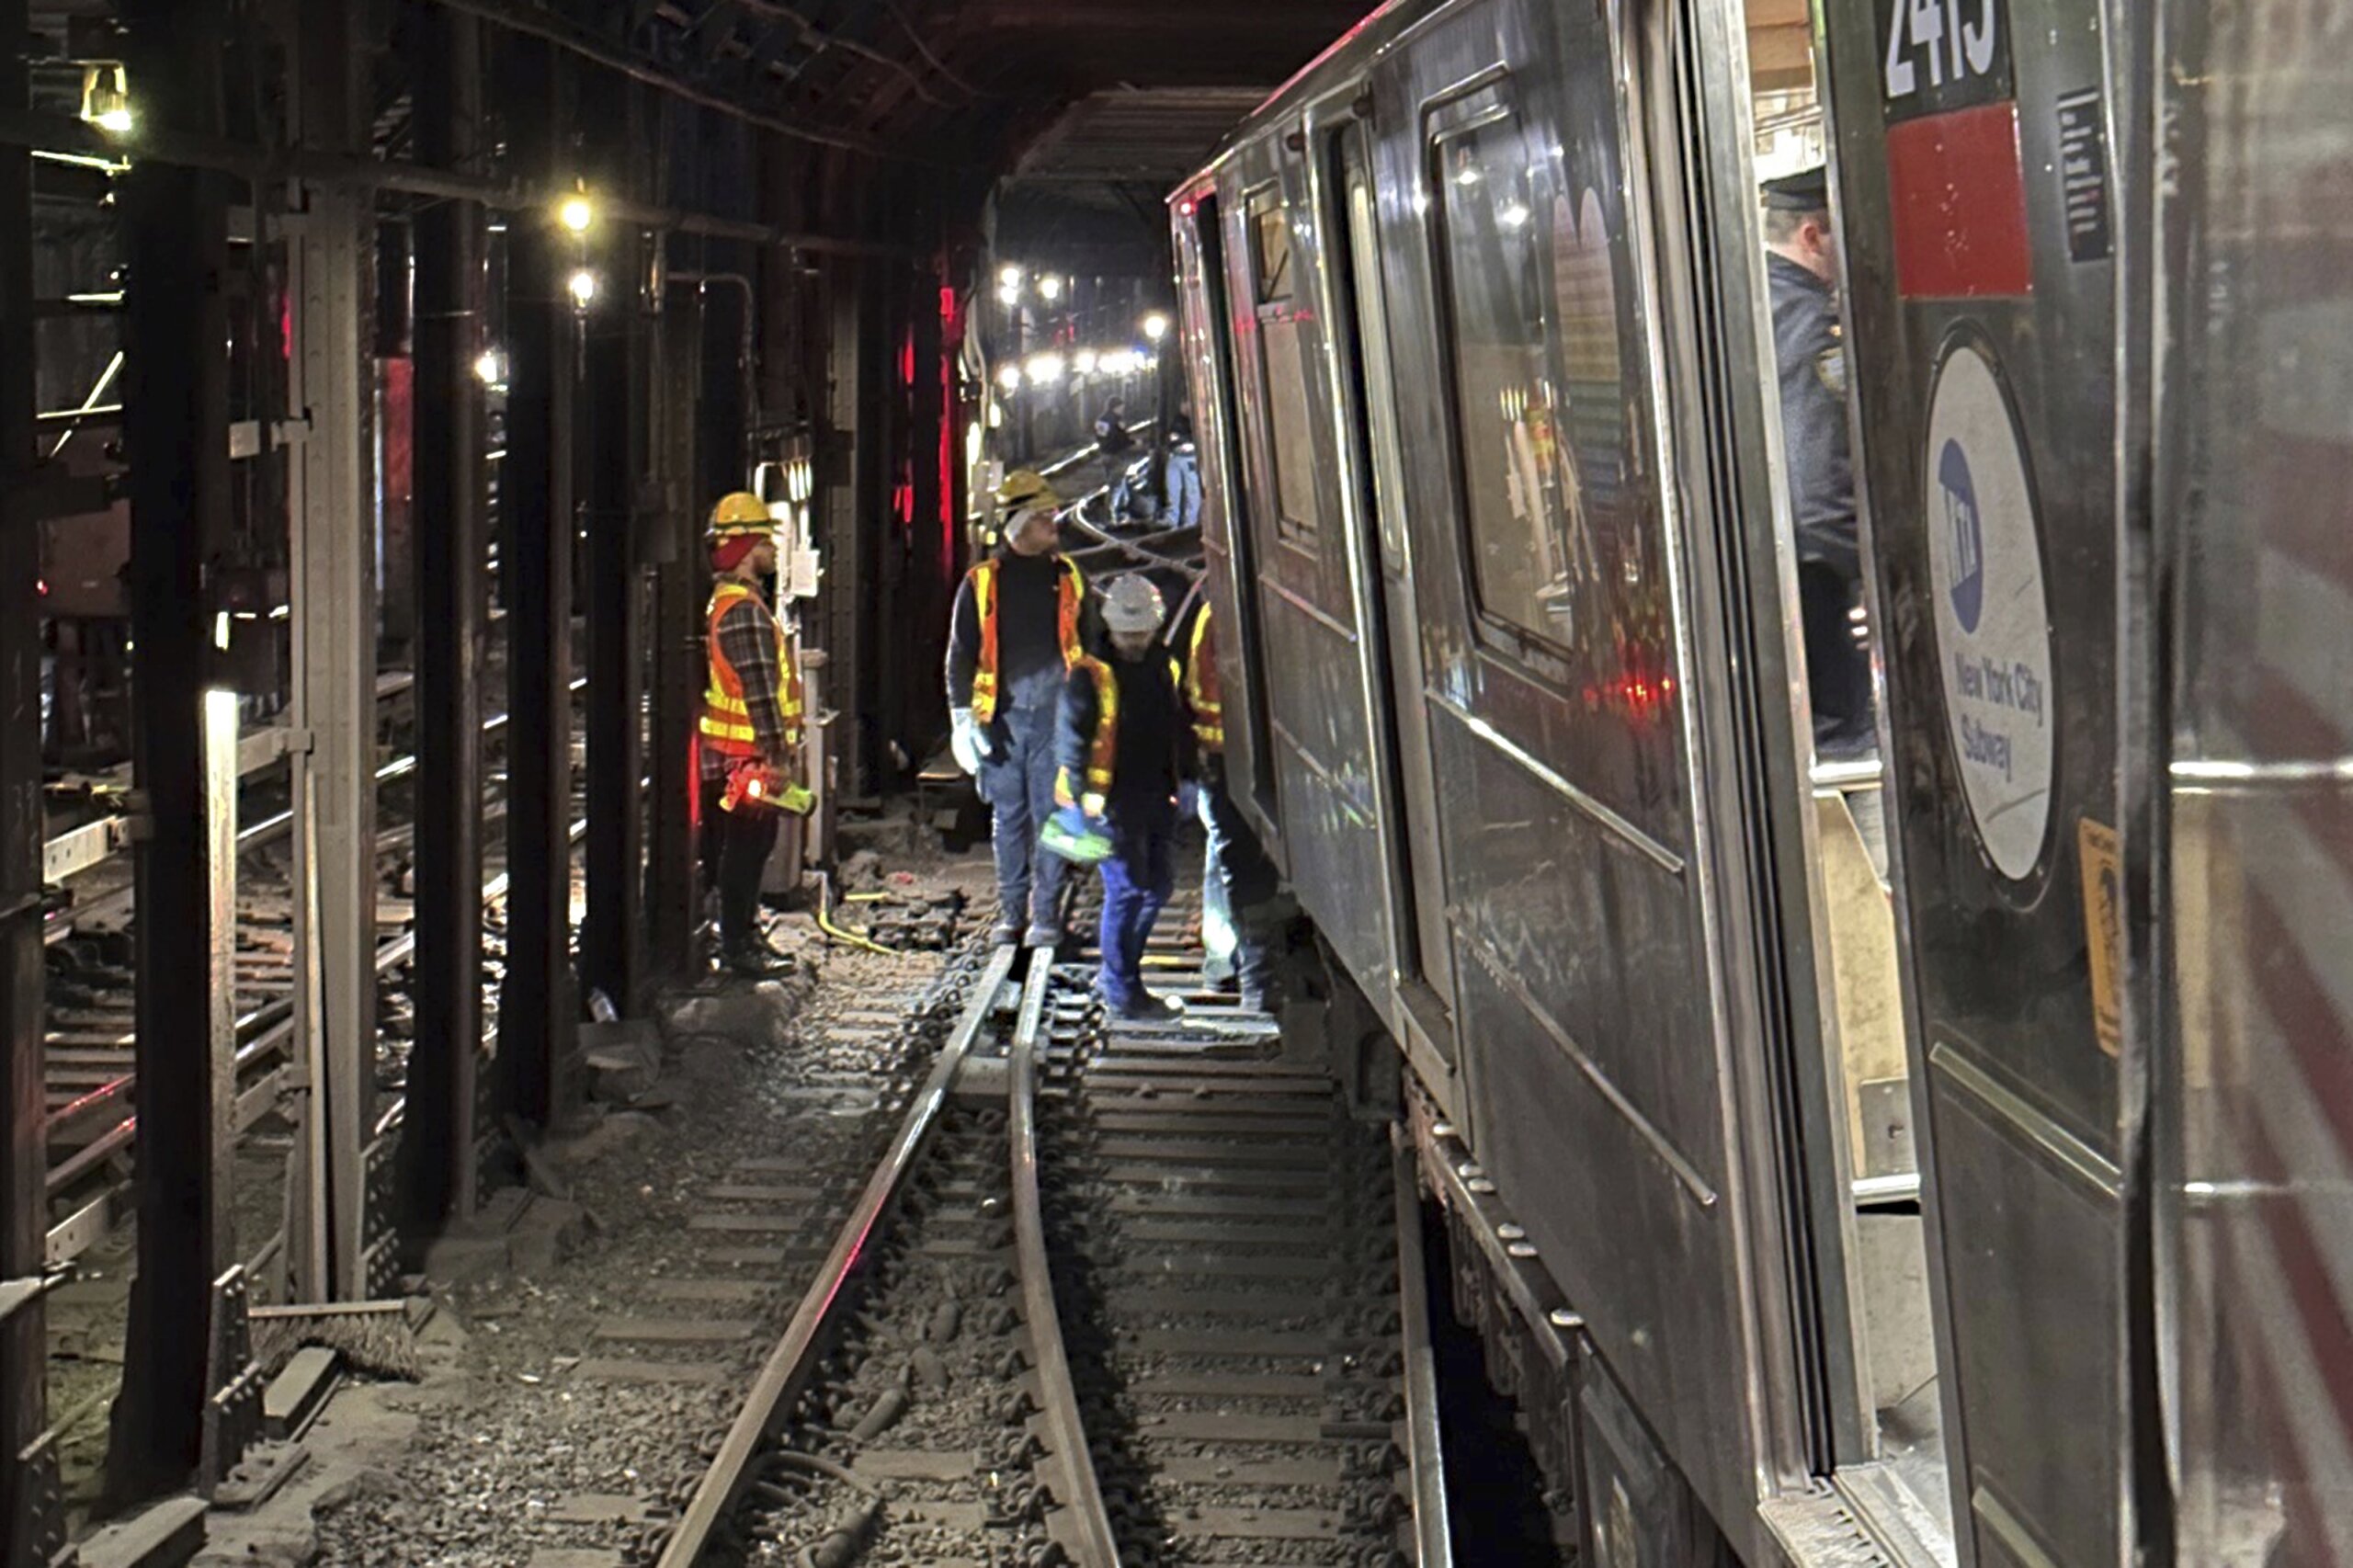 New York City subway train derails in collision with another train, injuring more than 20 people